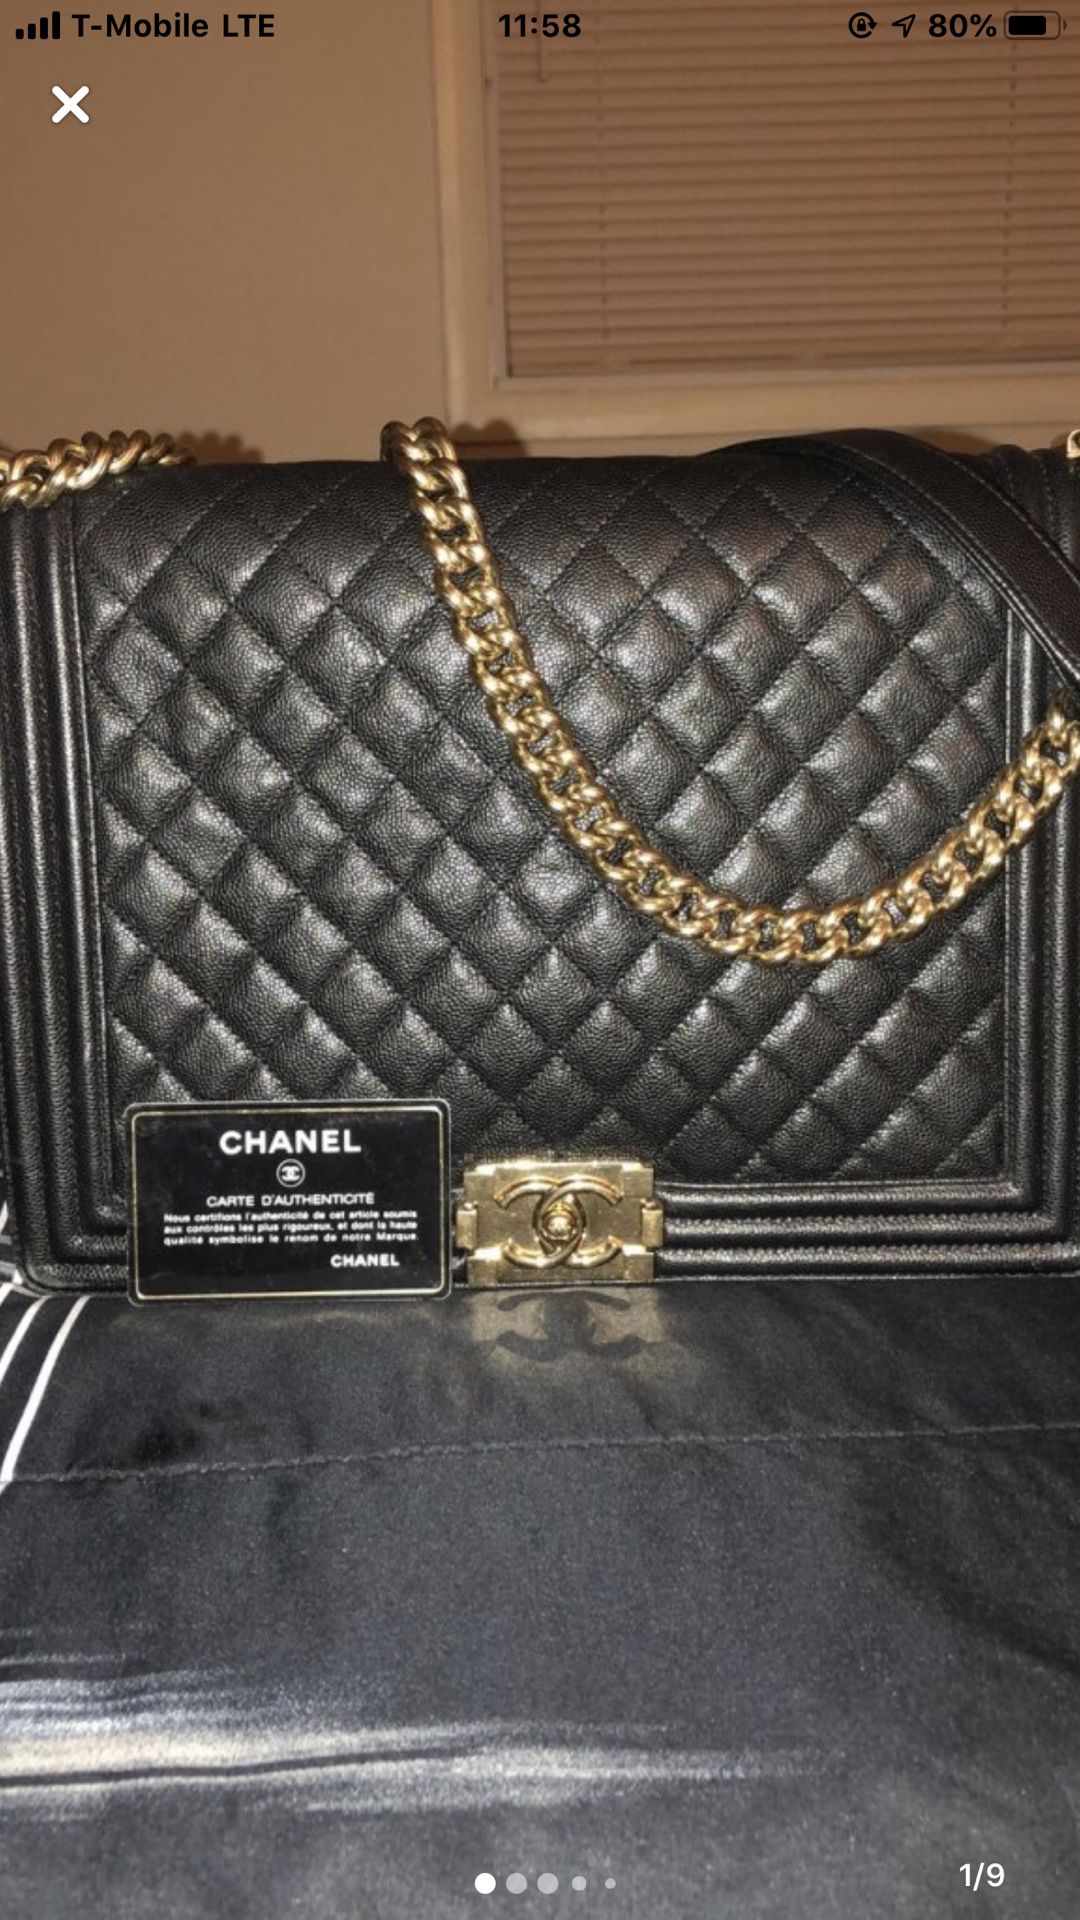 Authentic Black Chanel Bag W/ Gold Chain